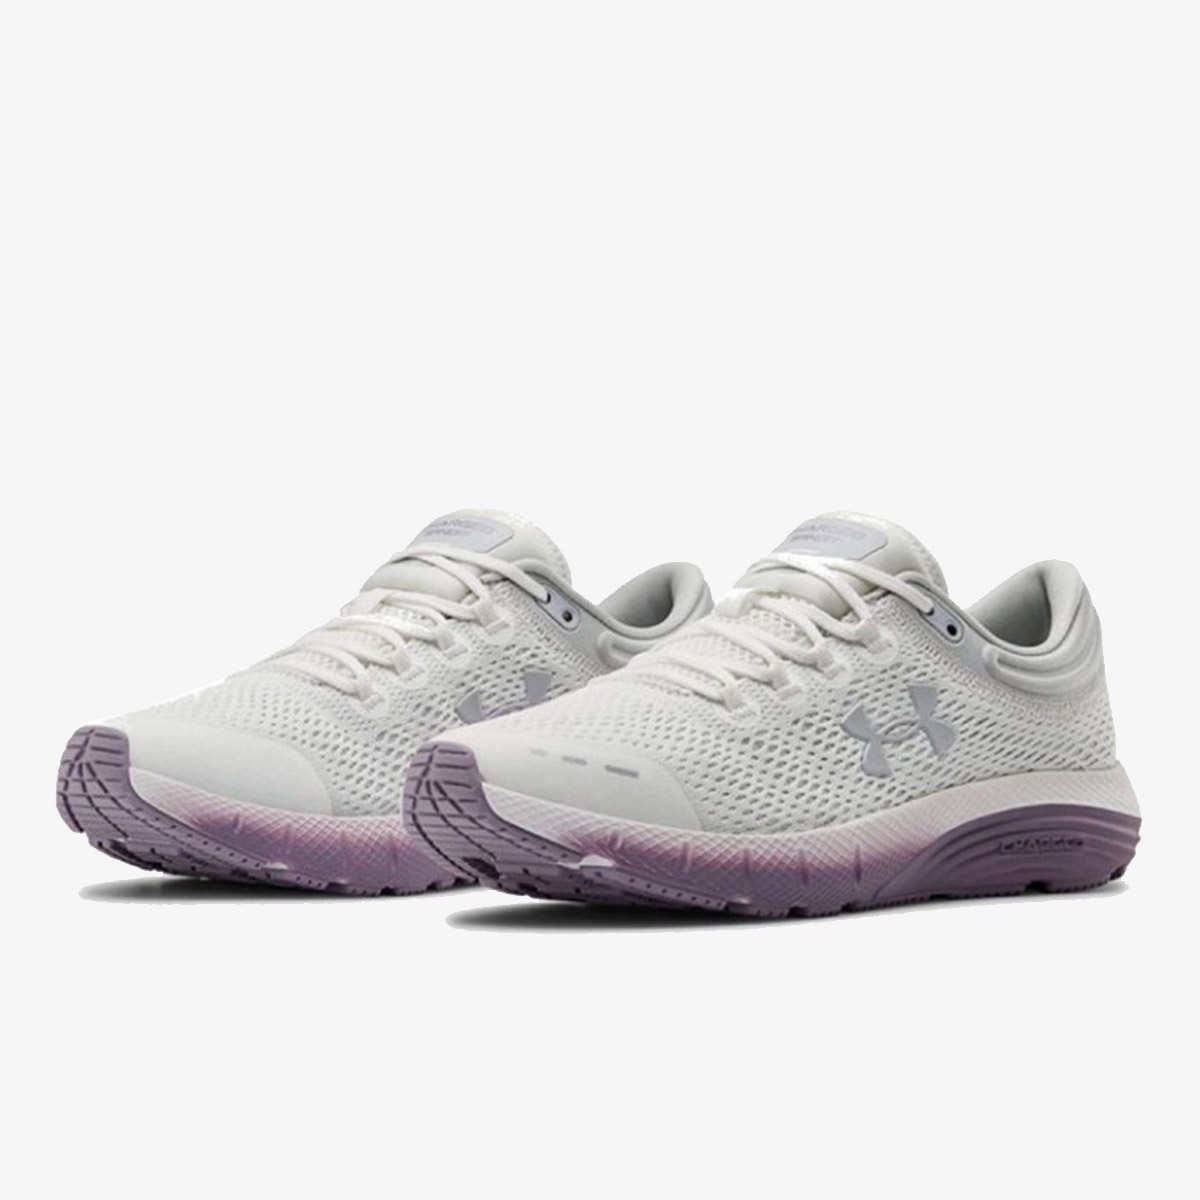 Under Armour UA Charged Bandit 5 